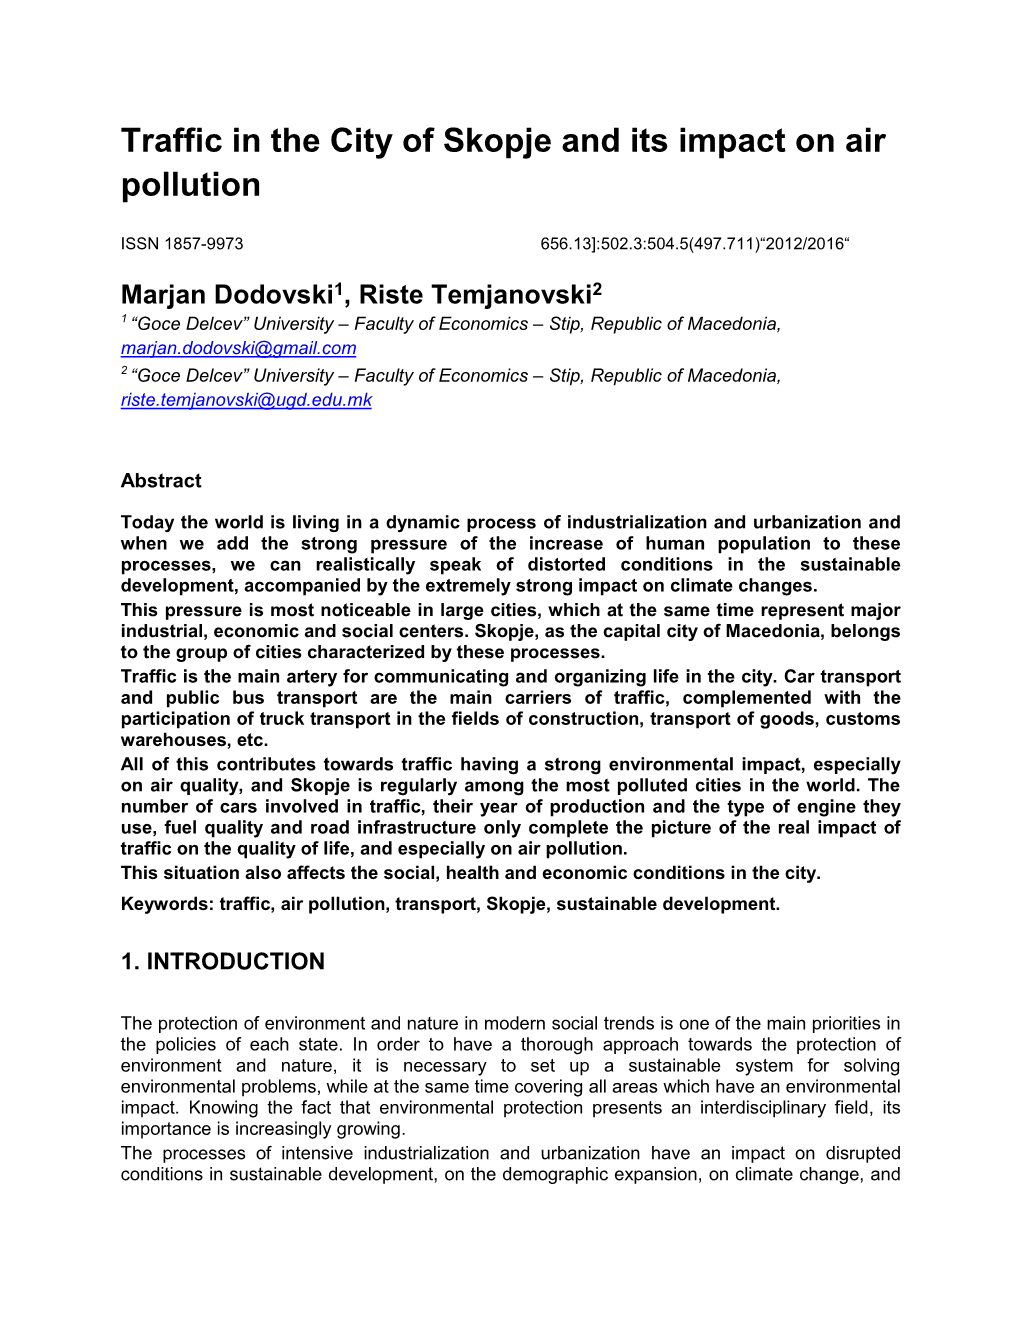 Traffic in the City of Skopje and Its Impact on Air Pollution